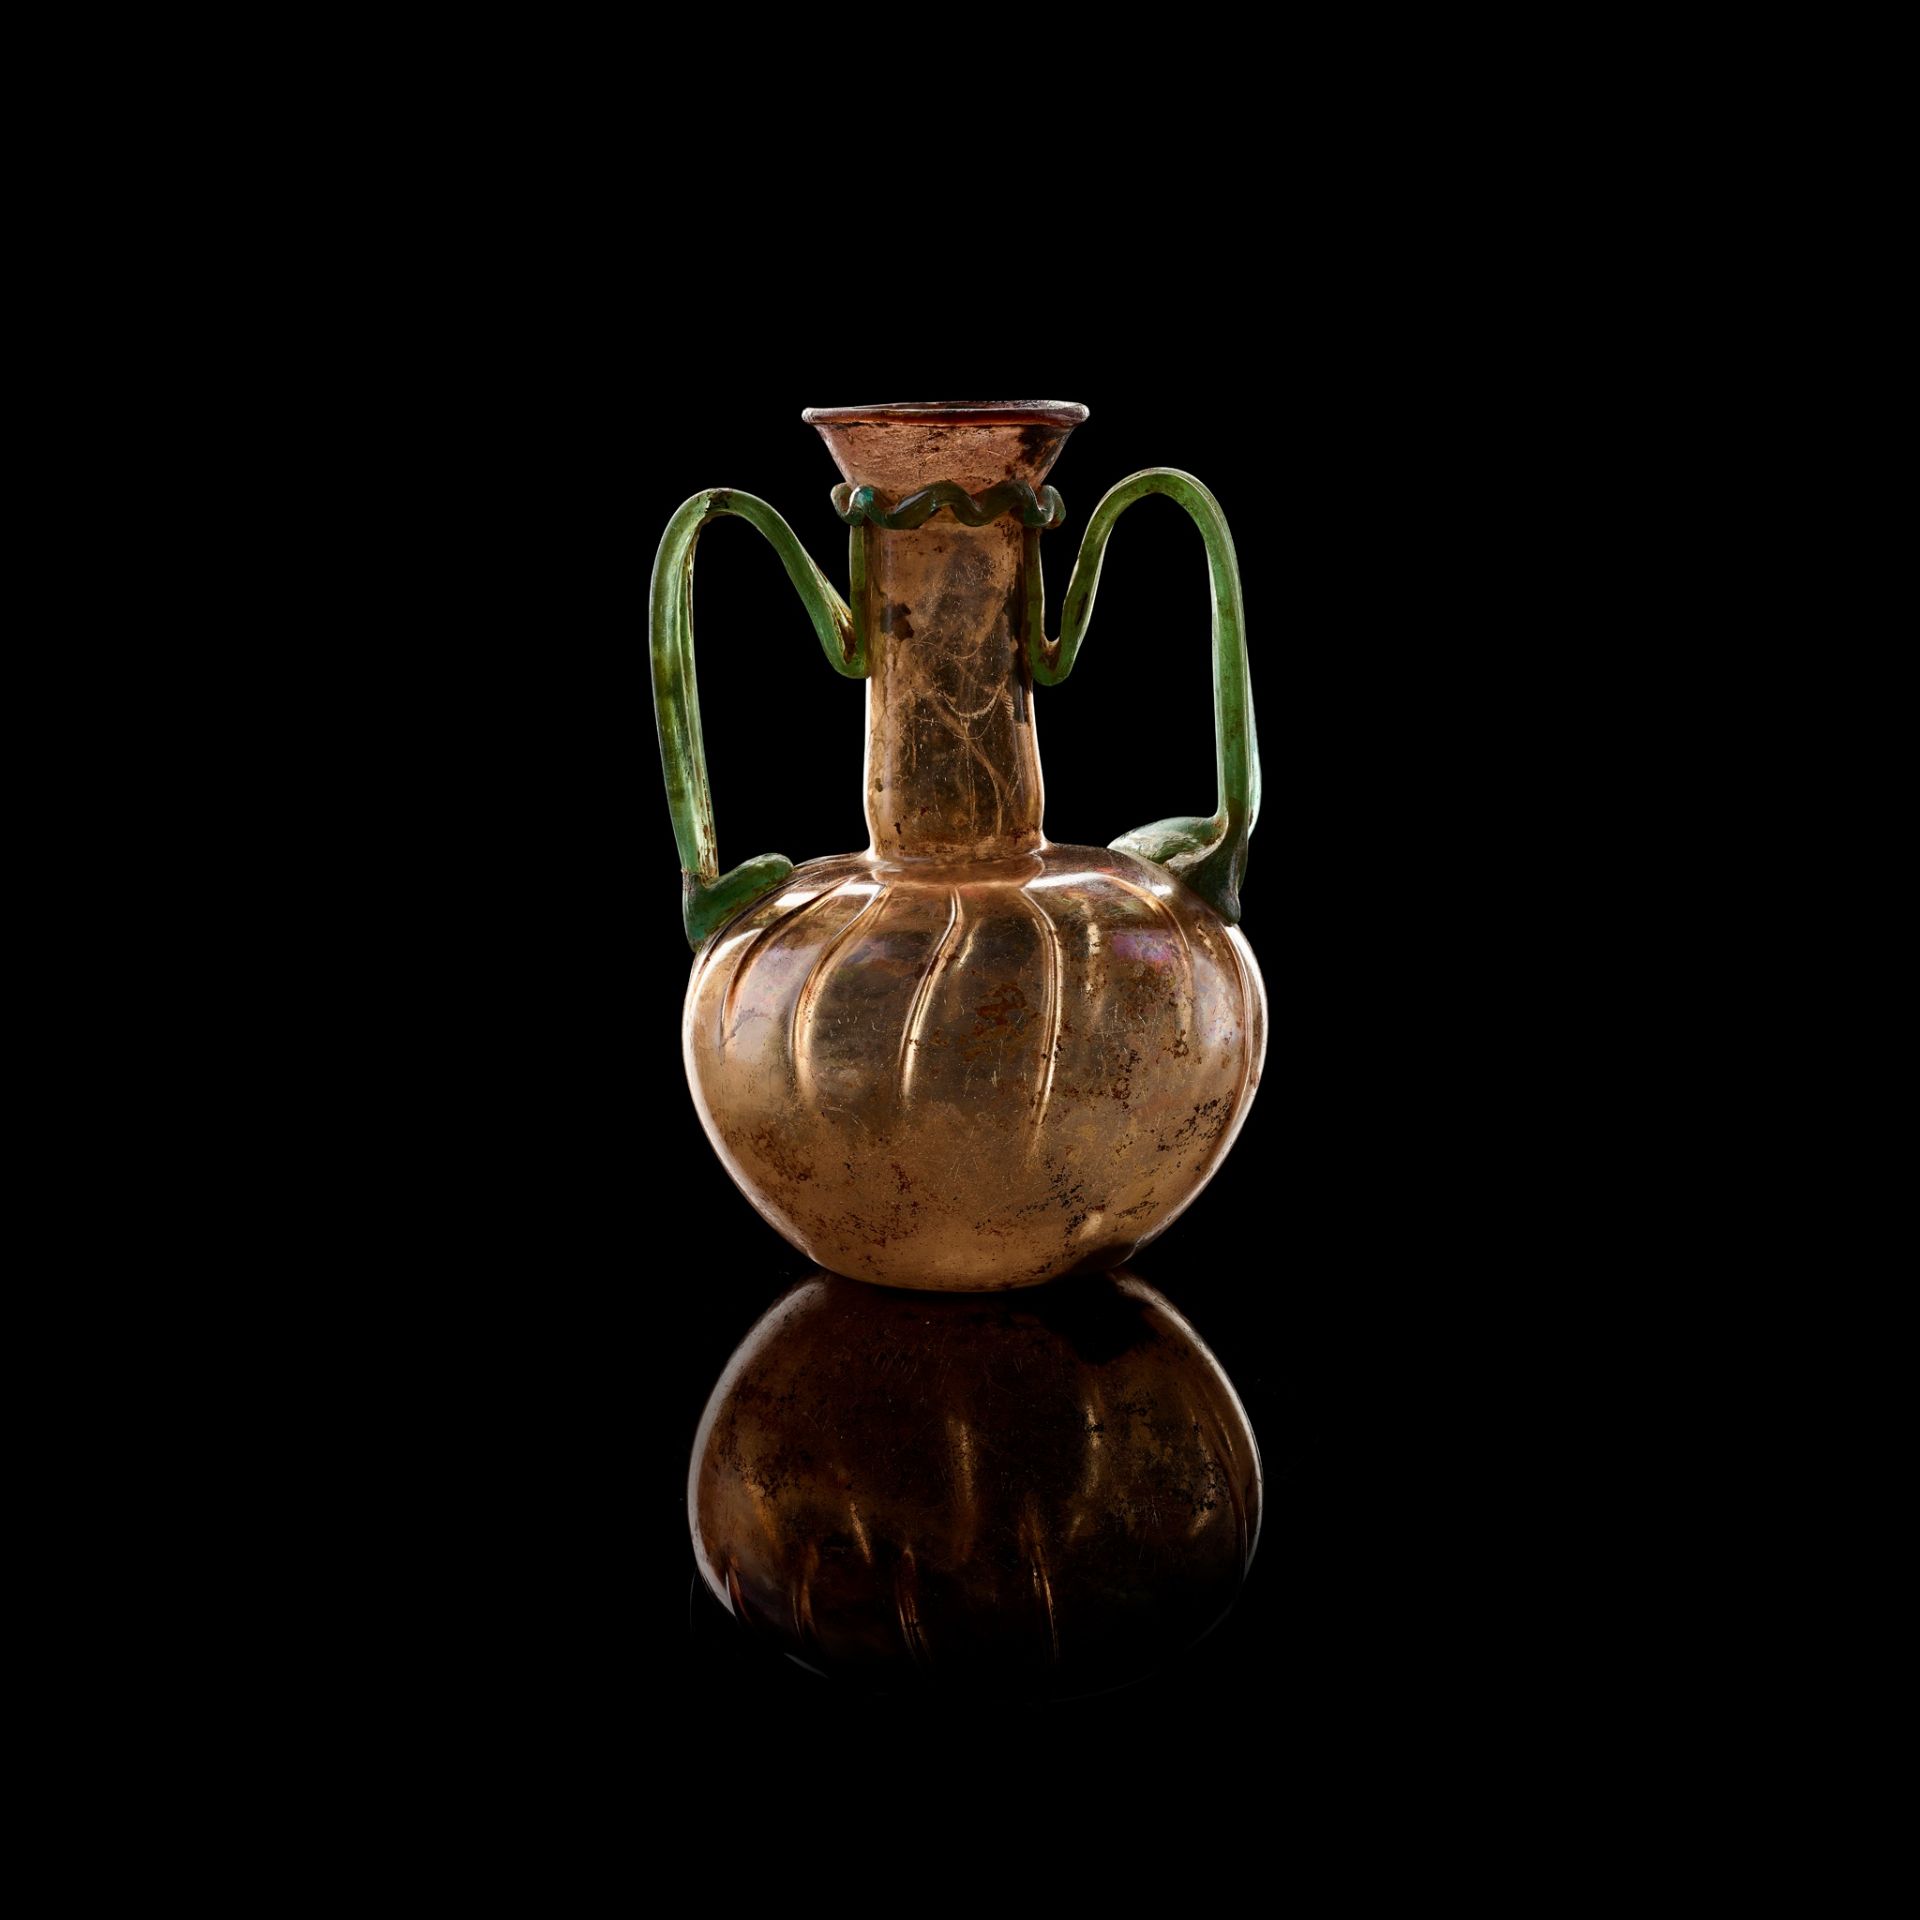 LARGE ROMAN GLASS TWIN HANDLED JAR EUROPE OR NEAR EAST, 3RD CENTURY A.D.